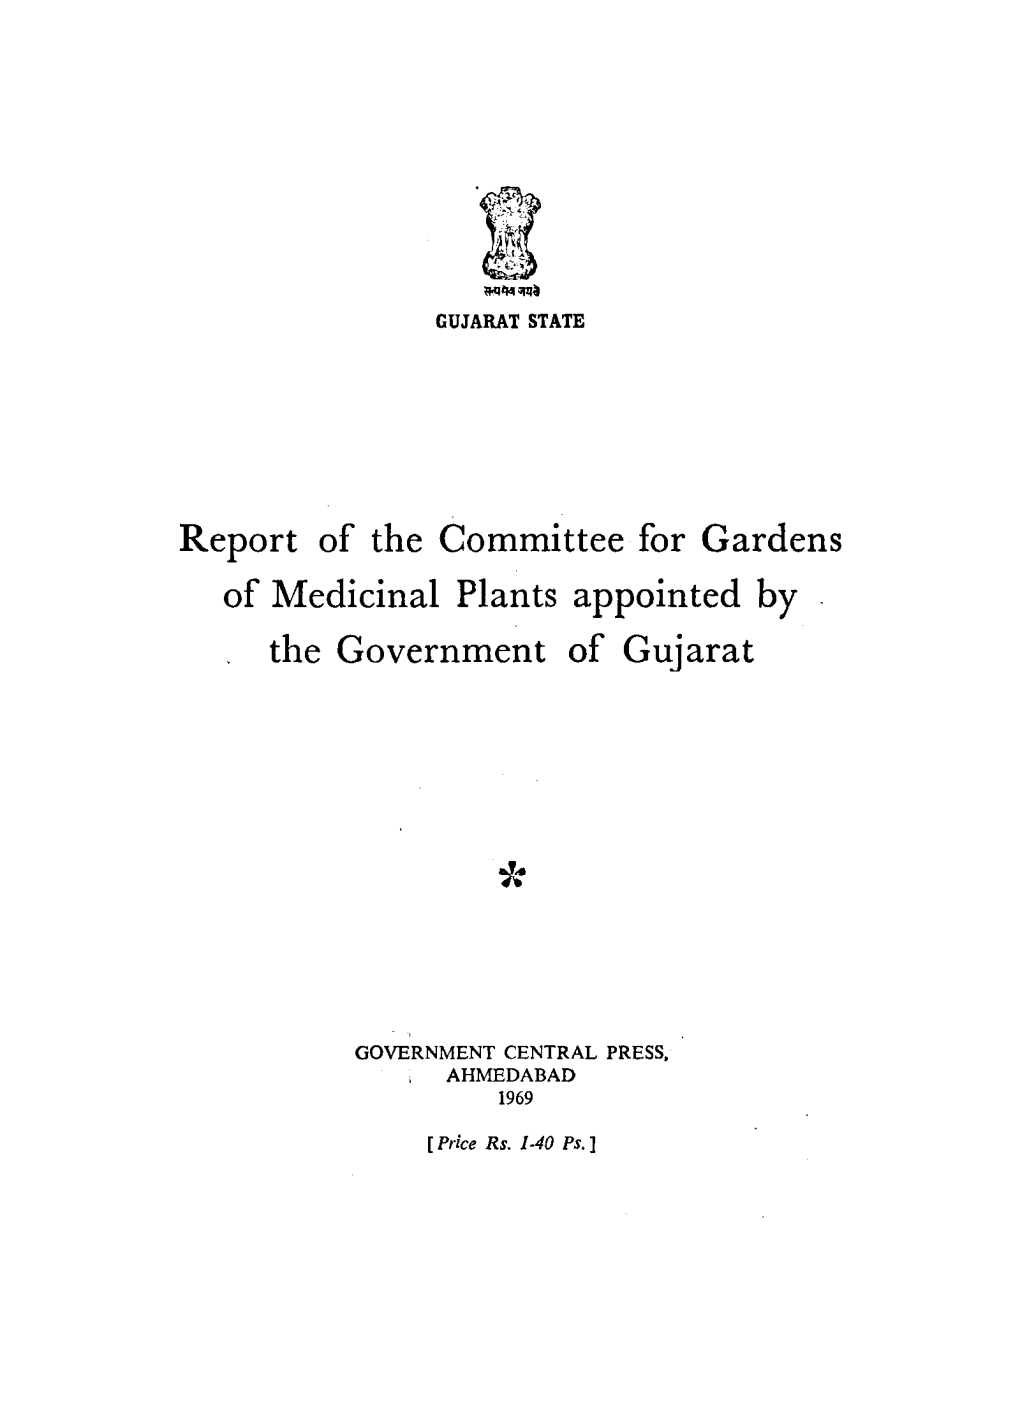 Report of the Committee for Gardens of Medicinal Plants Appointed by the Government of Gujarat